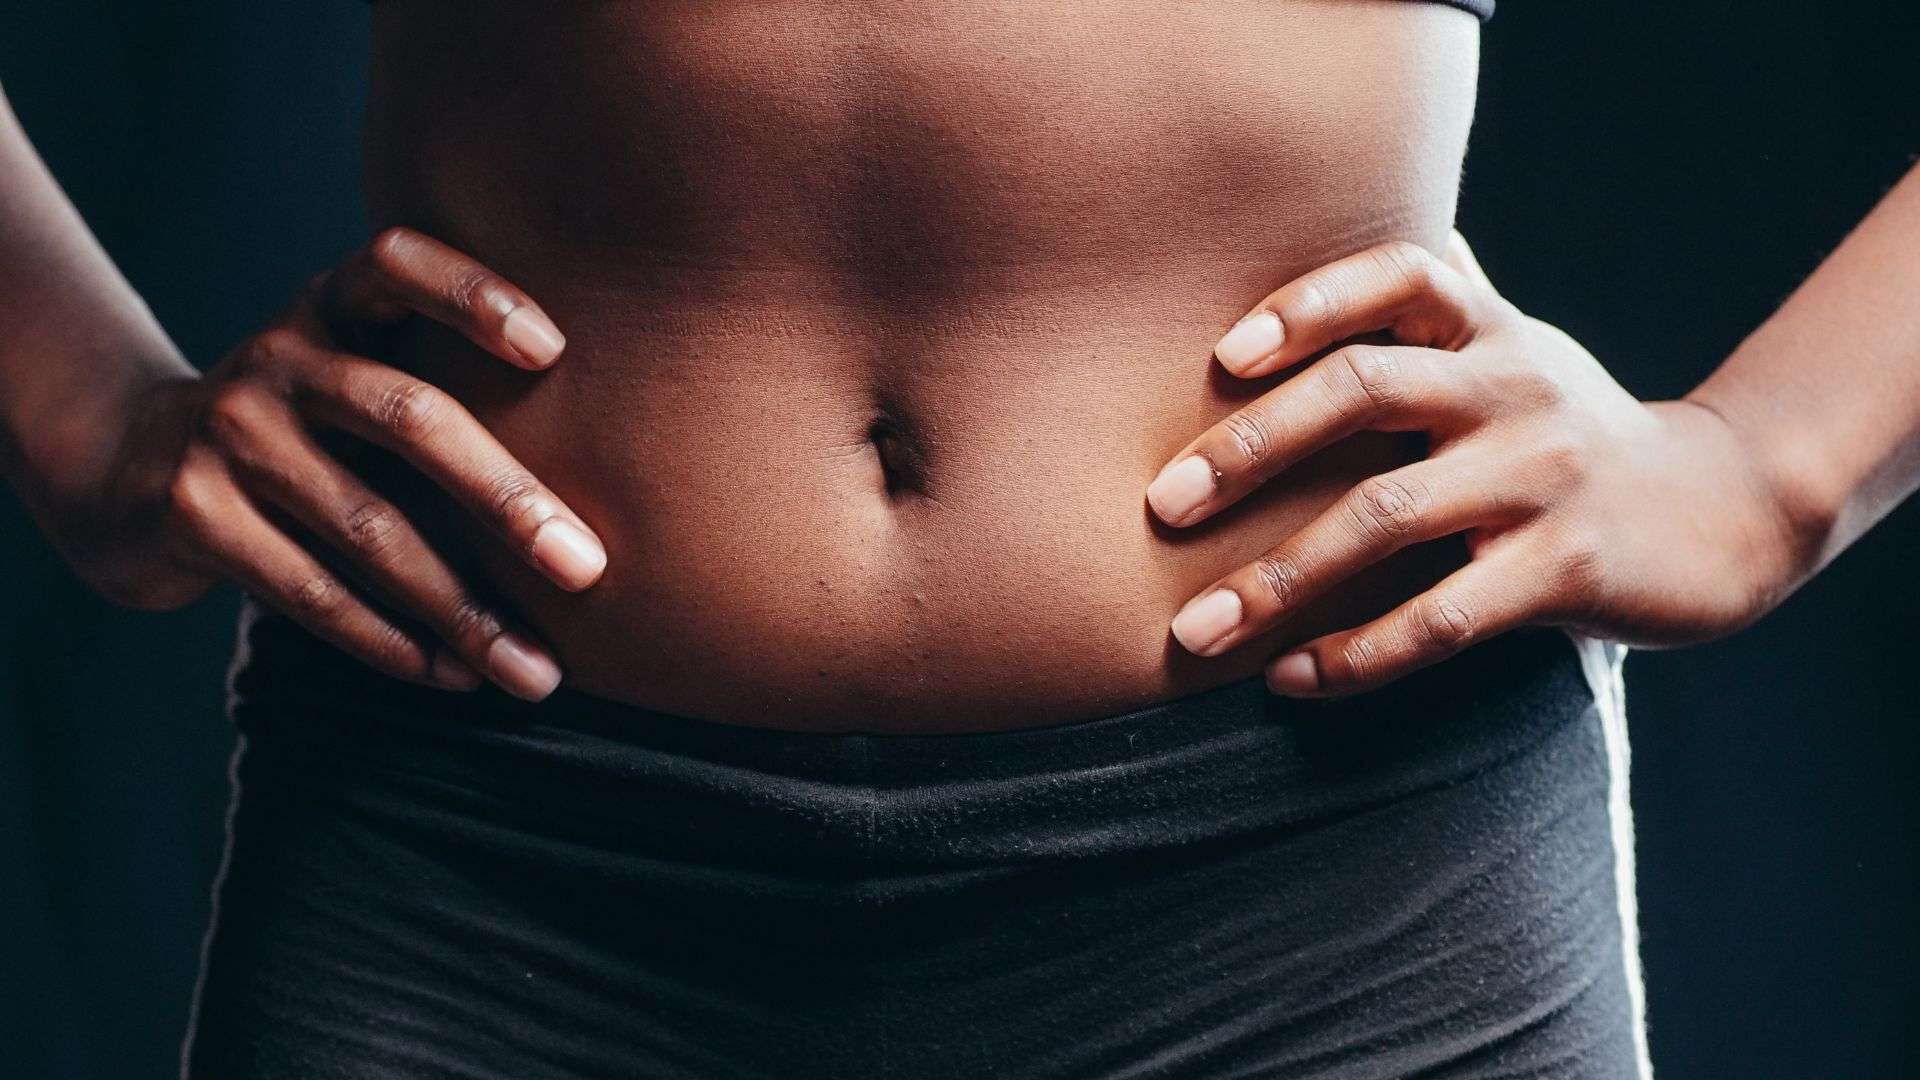 symptoms of muscle separation after tummy tuck